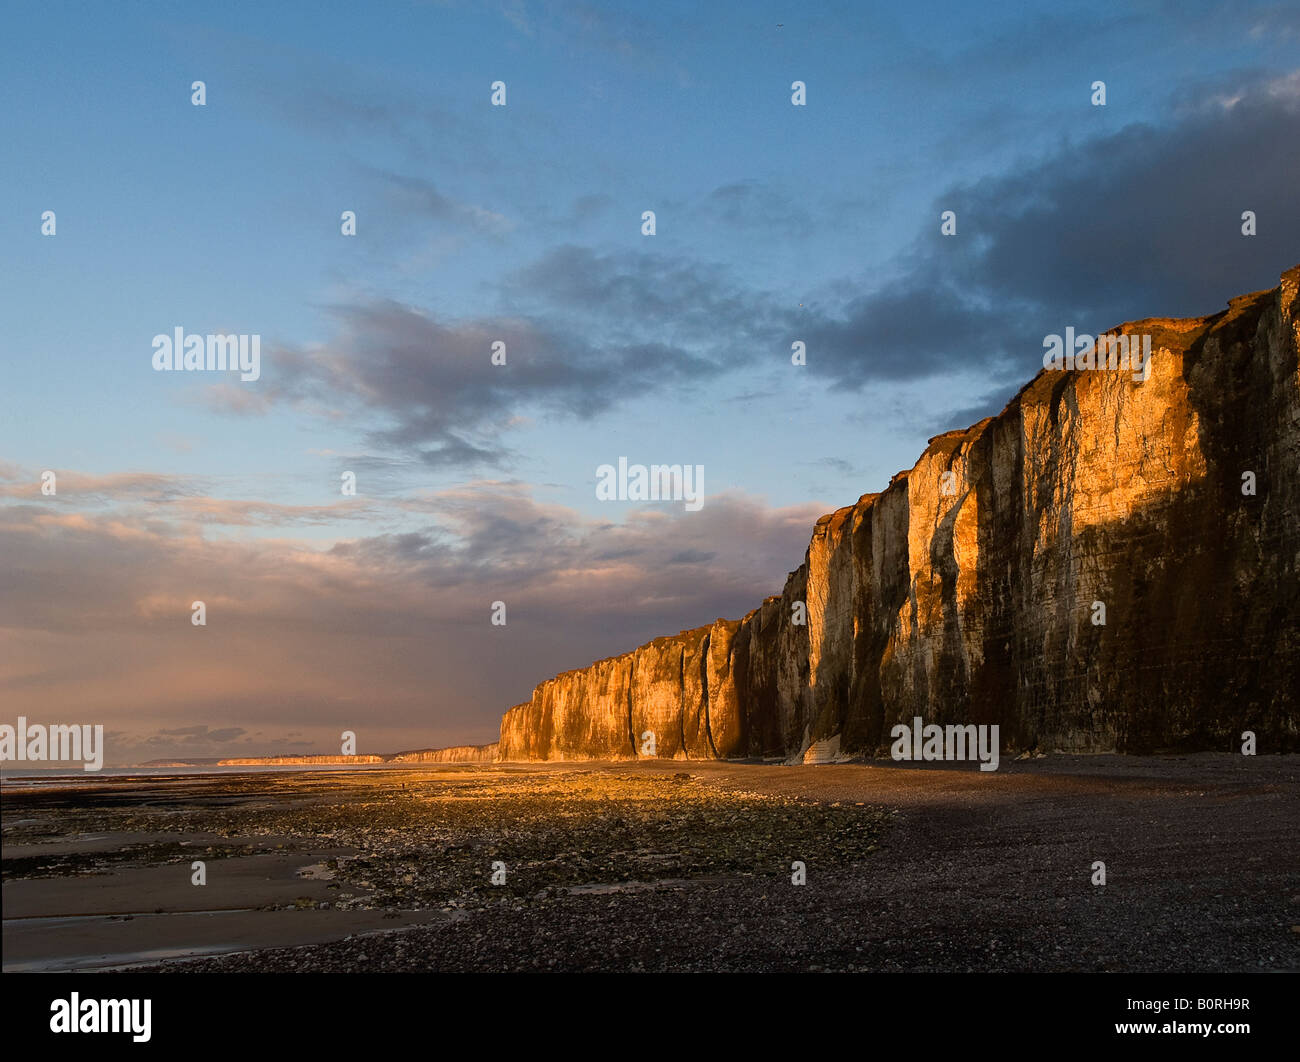 normandy's cliffs in st Valery-en-Caux at dawn horizontal Stock Photo